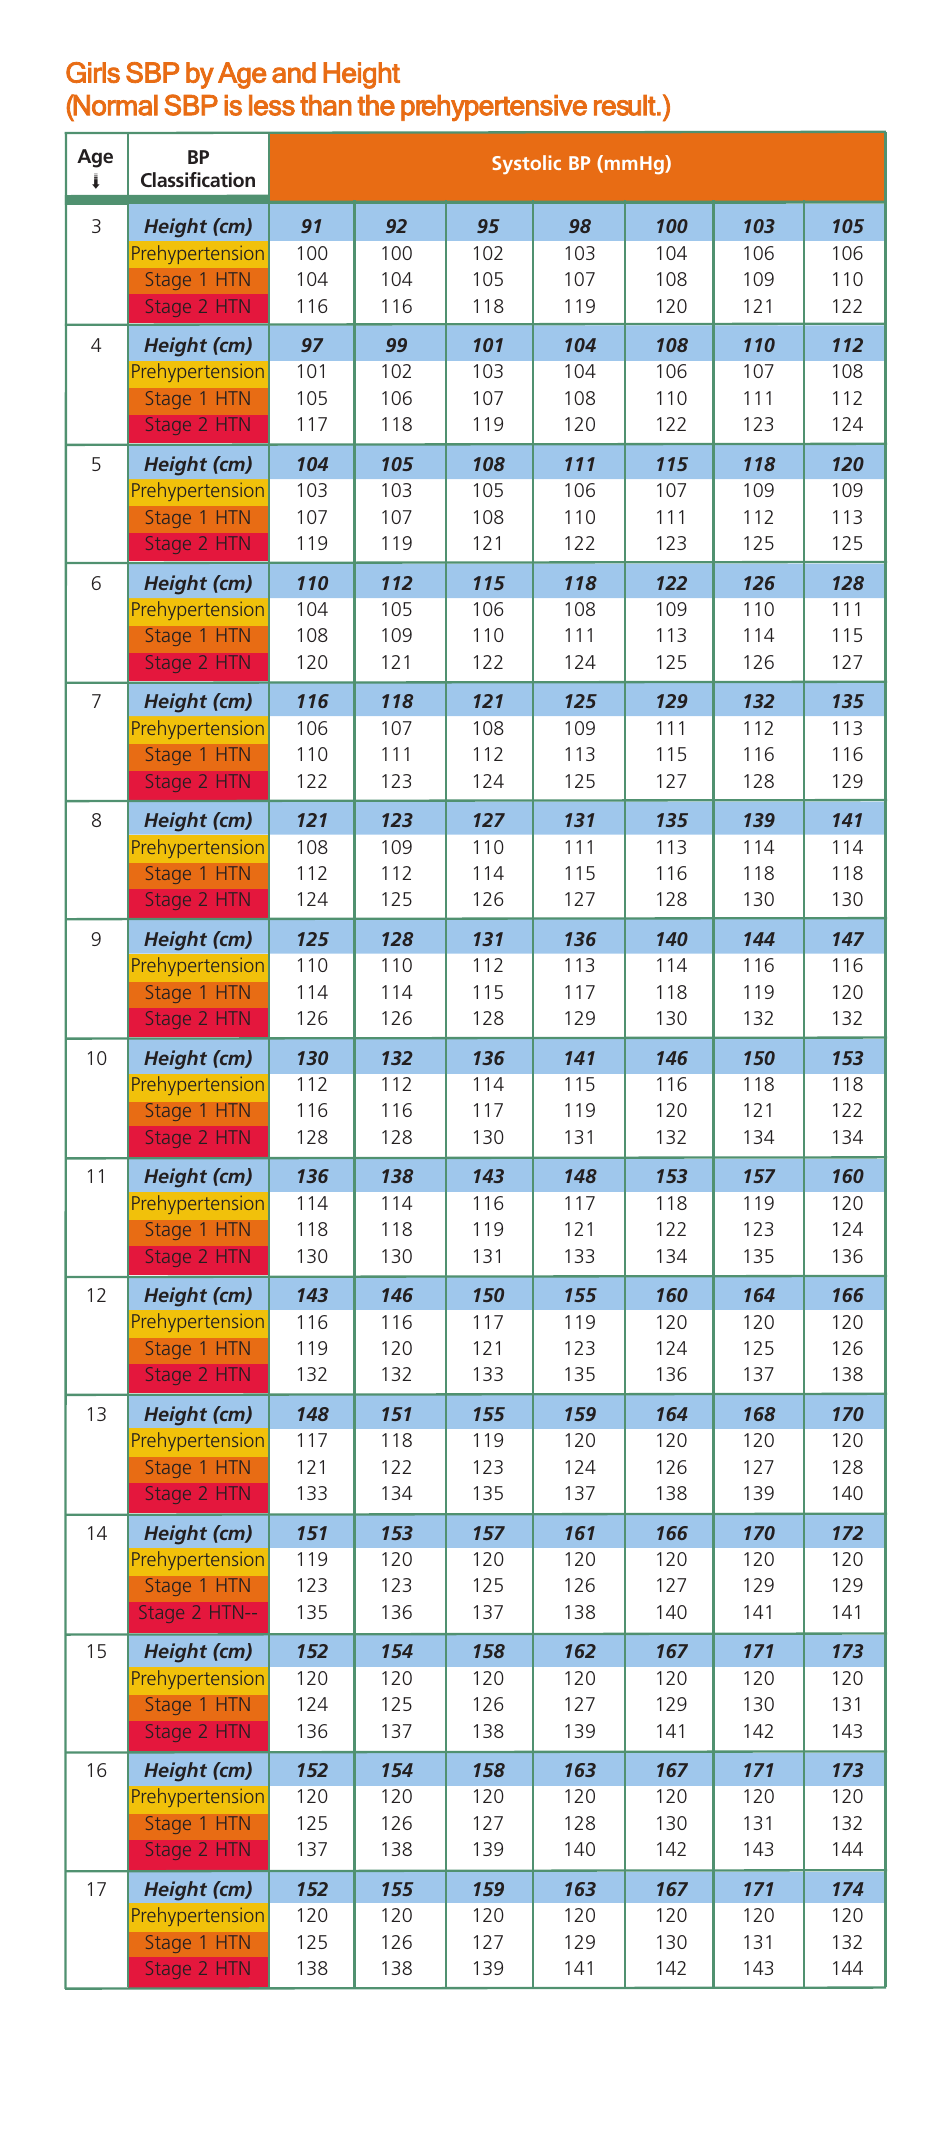 Girls SBP by Age and Height, Page 1